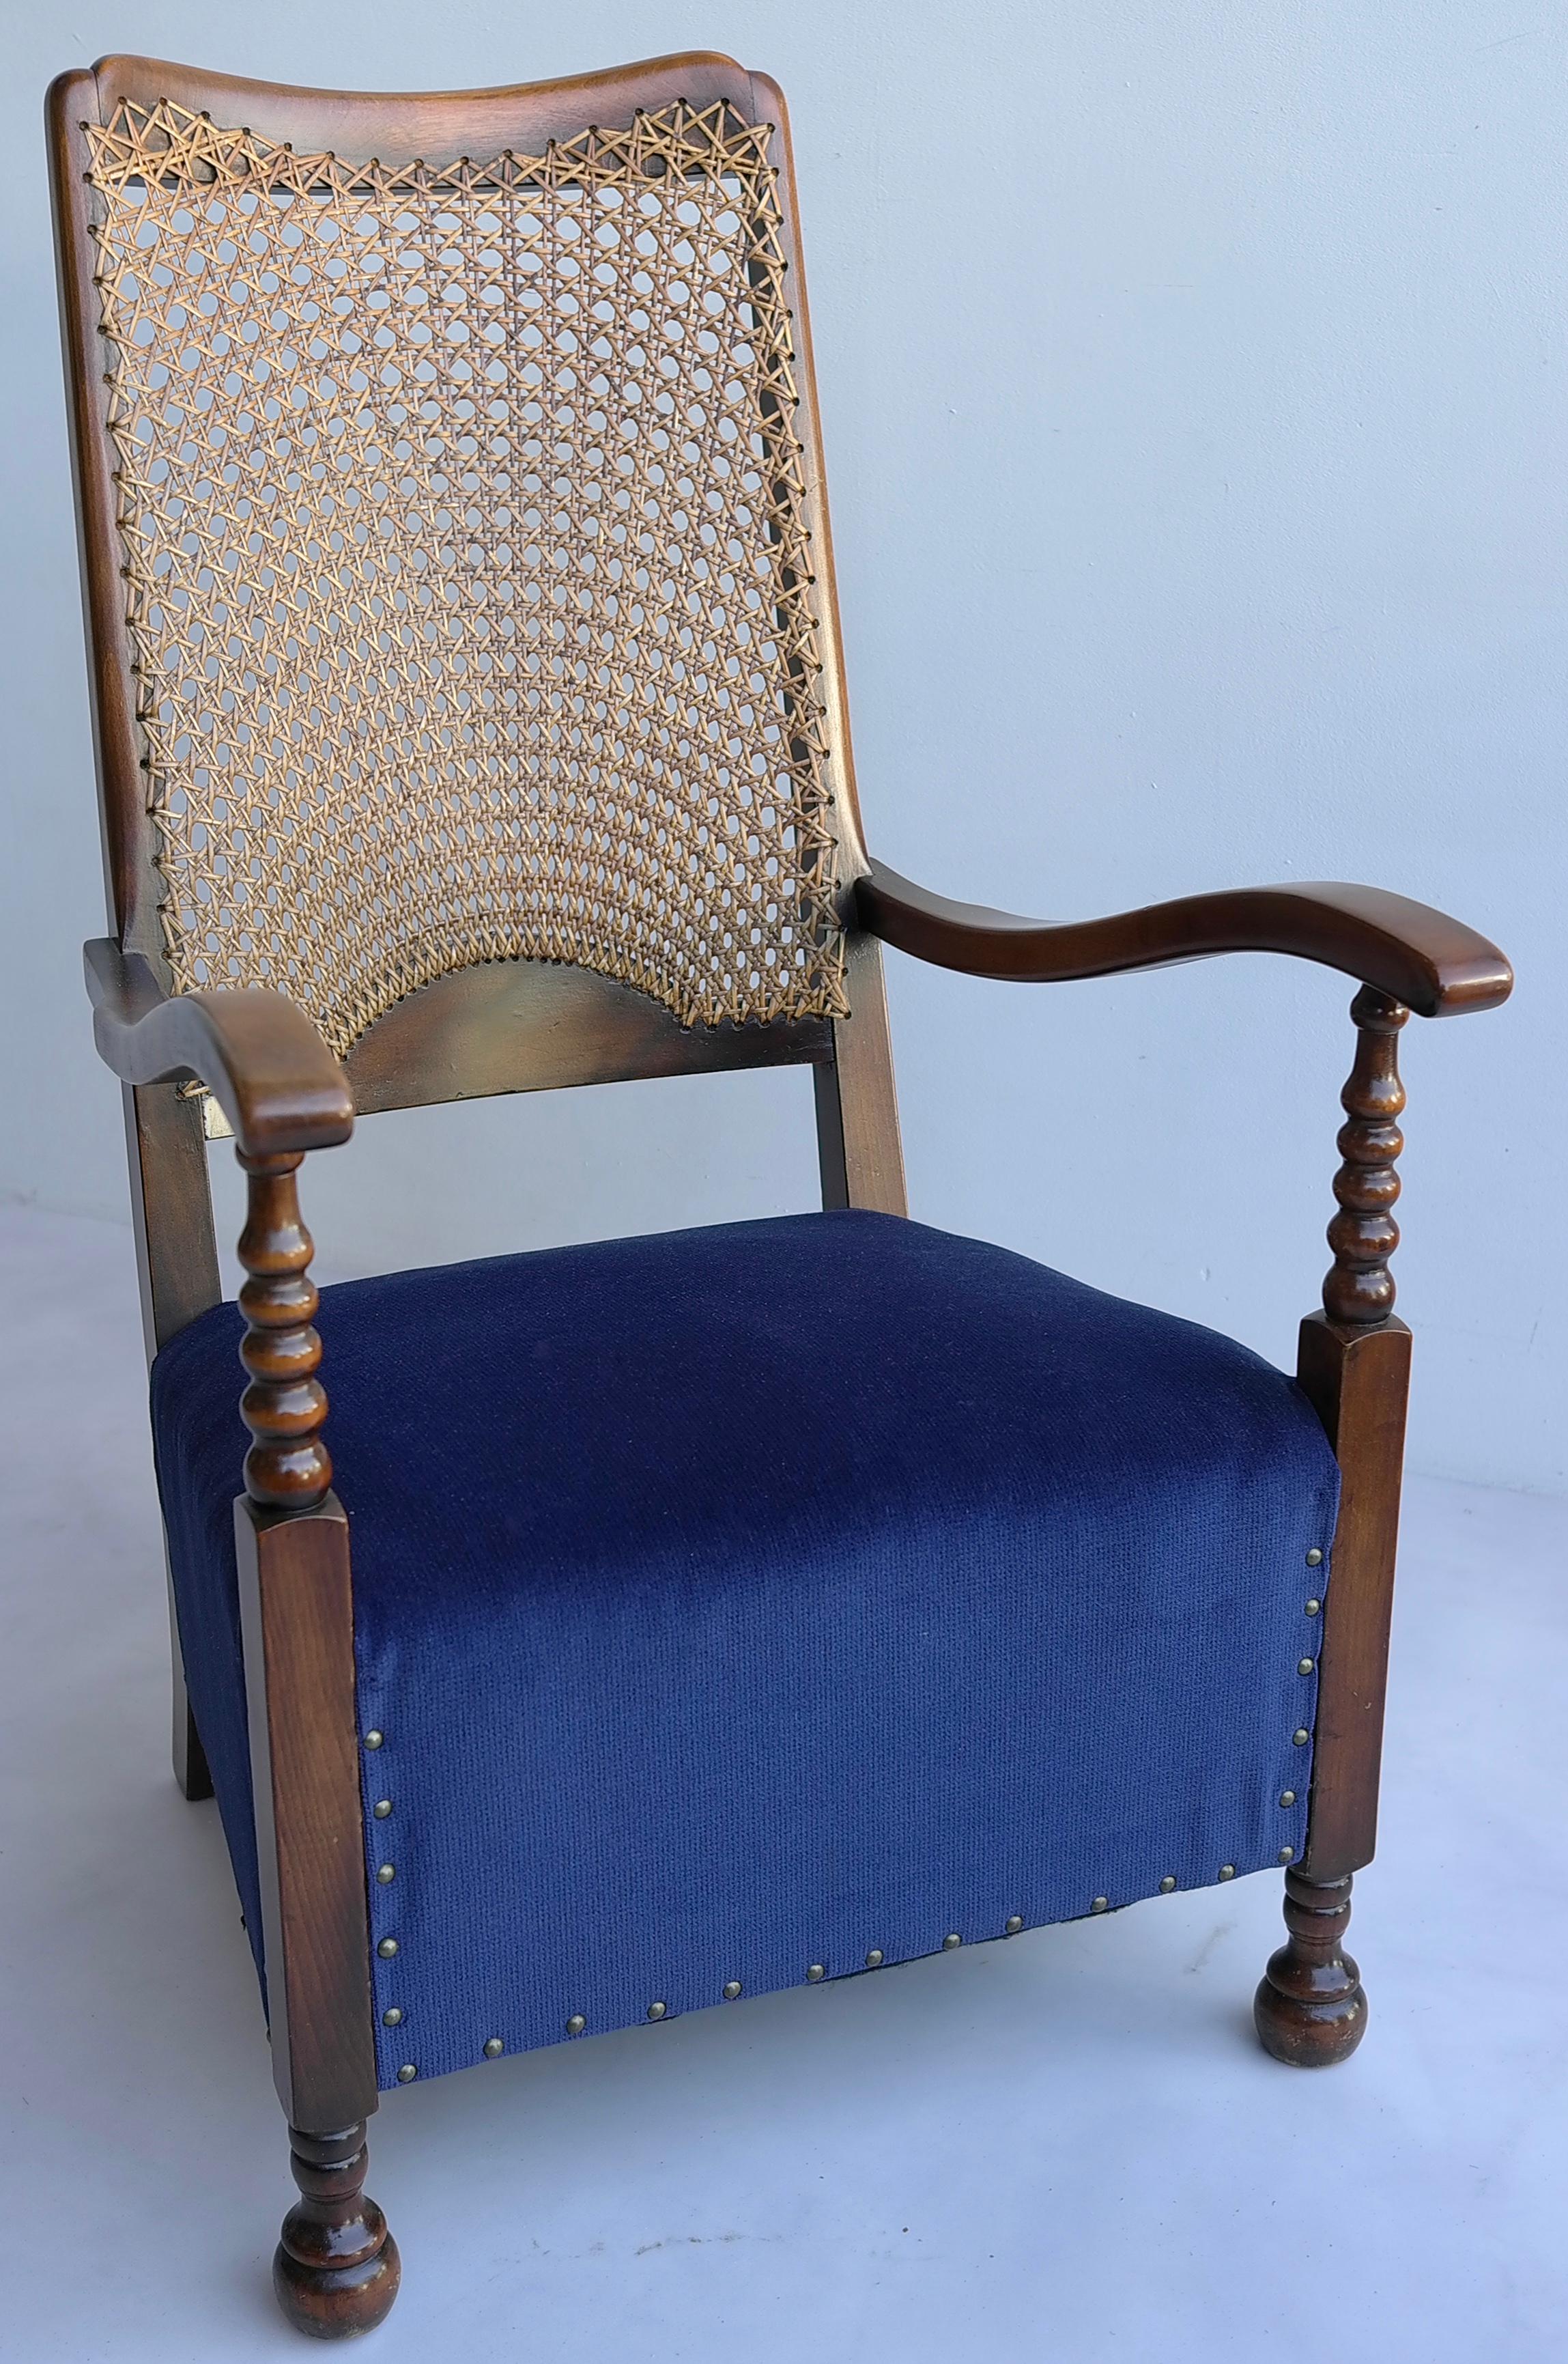 Classic highback lounge chair with blue seat and woven rattan back.